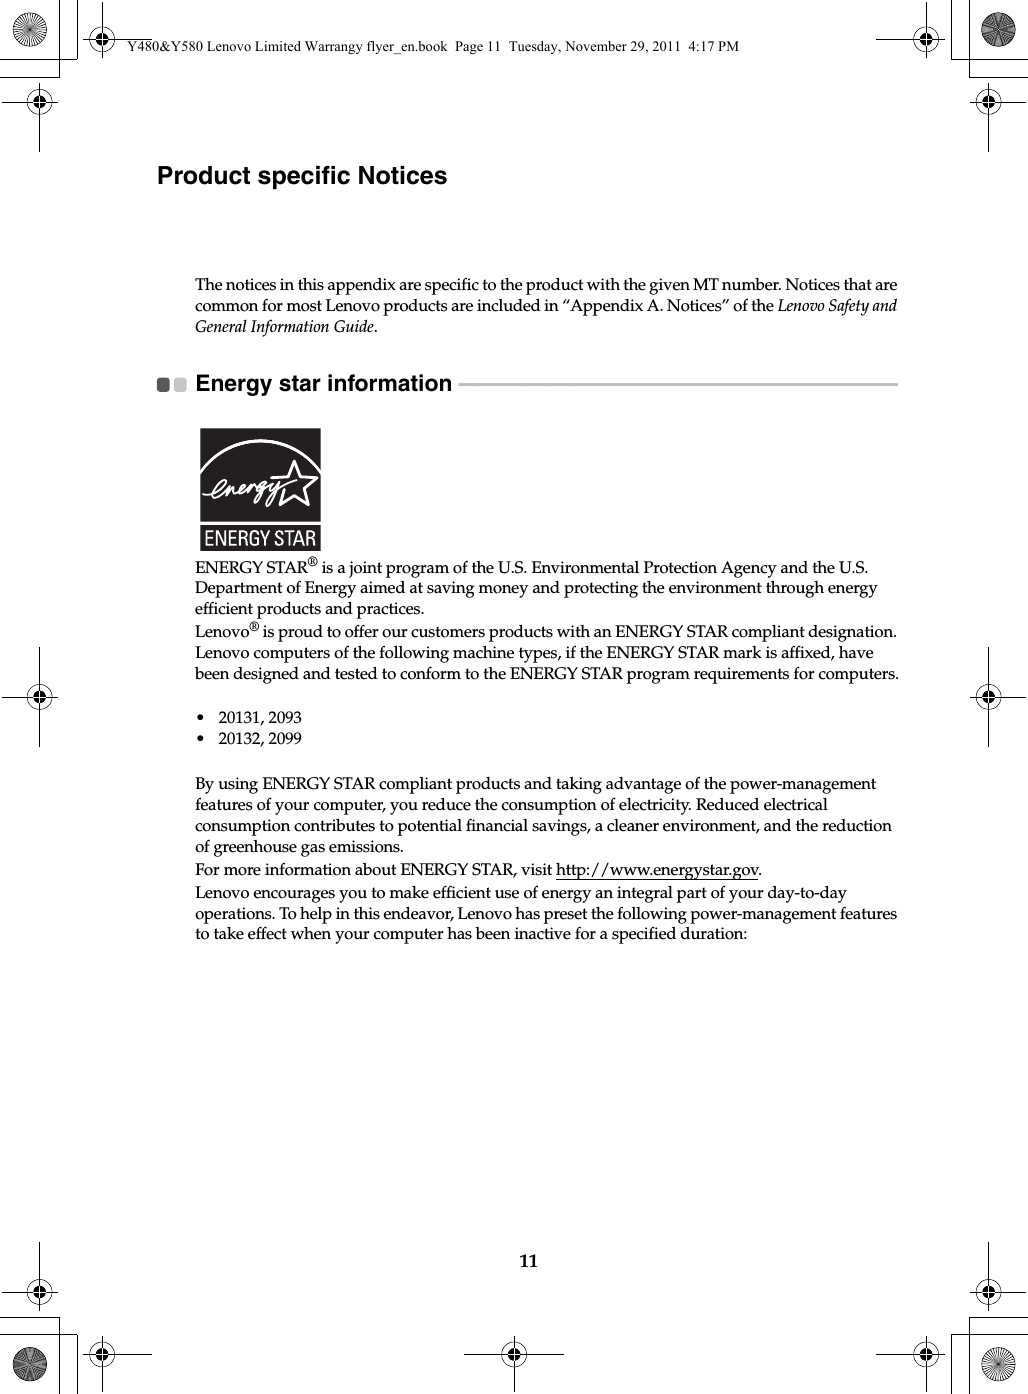 11Product specific NoticesThe notices in this appendix are specific to the product with the given MT number. Notices that are common for most Lenovo products are included in “Appendix A. Notices” of the Lenovo Safety and General Information Guide.Energy star information  - - - - - - - - - - - - - - - - - - - - - - - - - - - - - - - - - - - - - - - - - - - - - - - - - - - - - - - - - - - - - - - - - - - - - - - - - - - - - - - - - - - - - - - - - - -ENERGY STAR® is a joint program of the U.S. Environmental Protection Agency and the U.S. Department of Energy aimed at saving money and protecting the environment through energy efficient products and practices.Lenovo® is proud to offer our customers products with an ENERGY STAR compliant designation. Lenovo computers of the following machine types, if the ENERGY STAR mark is affixed, have been designed and tested to conform to the ENERGY STAR program requirements for computers.• 20131, 2093• 20132, 2099By using ENERGY STAR compliant products and taking advantage of the power-management features of your computer, you reduce the consumption of electricity. Reduced electrical consumption contributes to potential financial savings, a cleaner environment, and the reduction of greenhouse gas emissions.For more information about ENERGY STAR, visit http://www.energystar.gov.Lenovo encourages you to make efficient use of energy an integral part of your day-to-day operations. To help in this endeavor, Lenovo has preset the following power-management features to take effect when your computer has been inactive for a specified duration:Y480&amp;Y580 Lenovo Limited Warrangy flyer_en.book  Page 11  Tuesday, November 29, 2011  4:17 PM